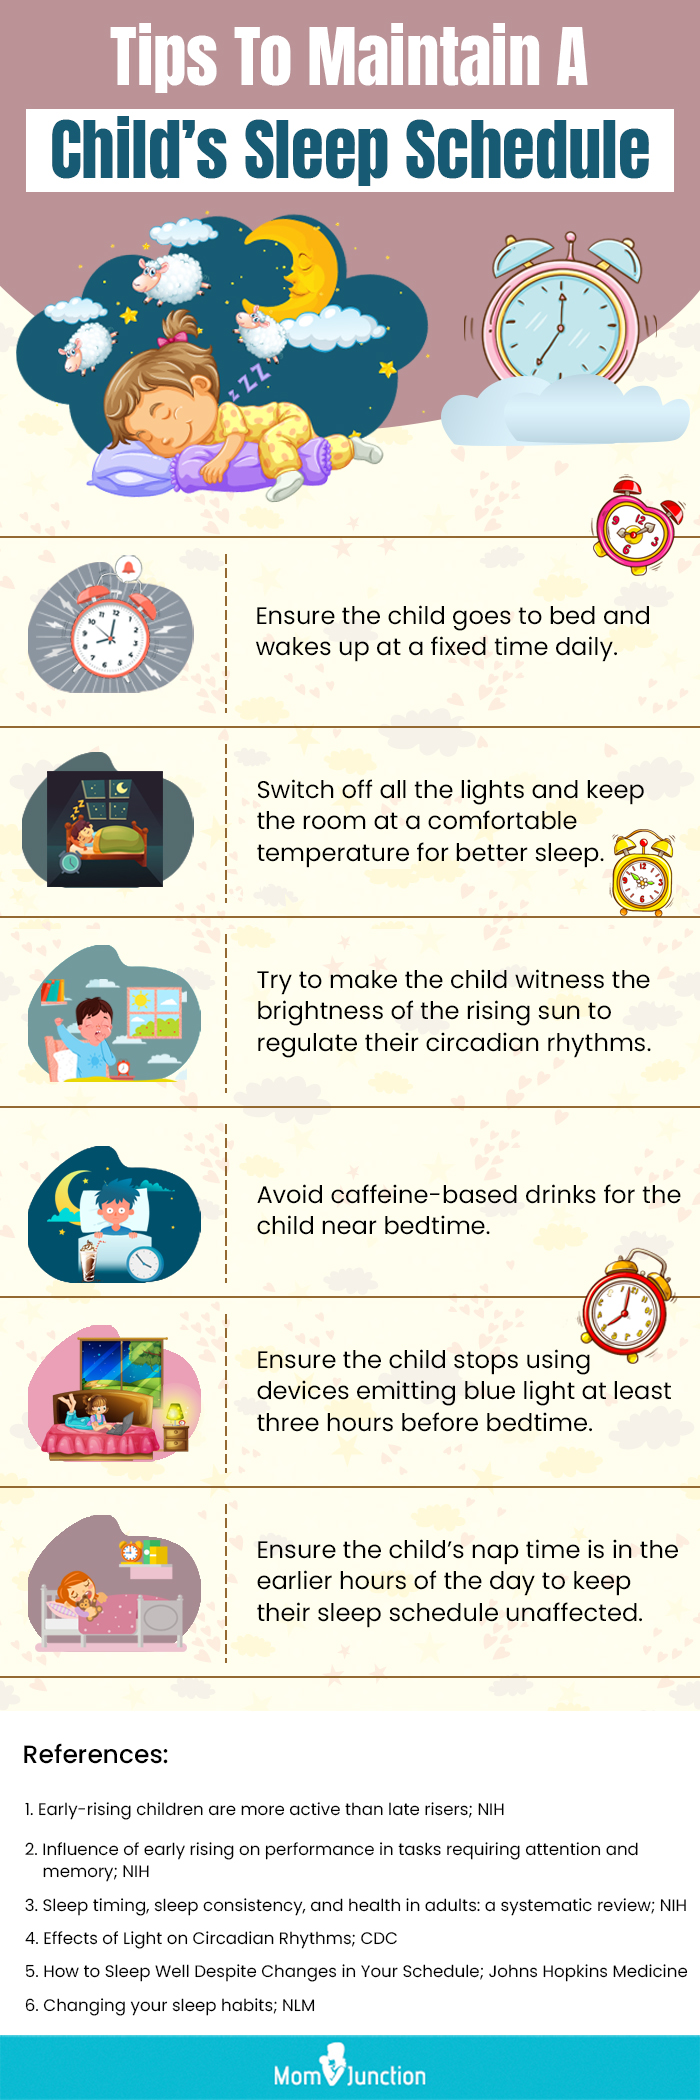 Tips To Maintain A Child’s Sleep Schedule (infographic)